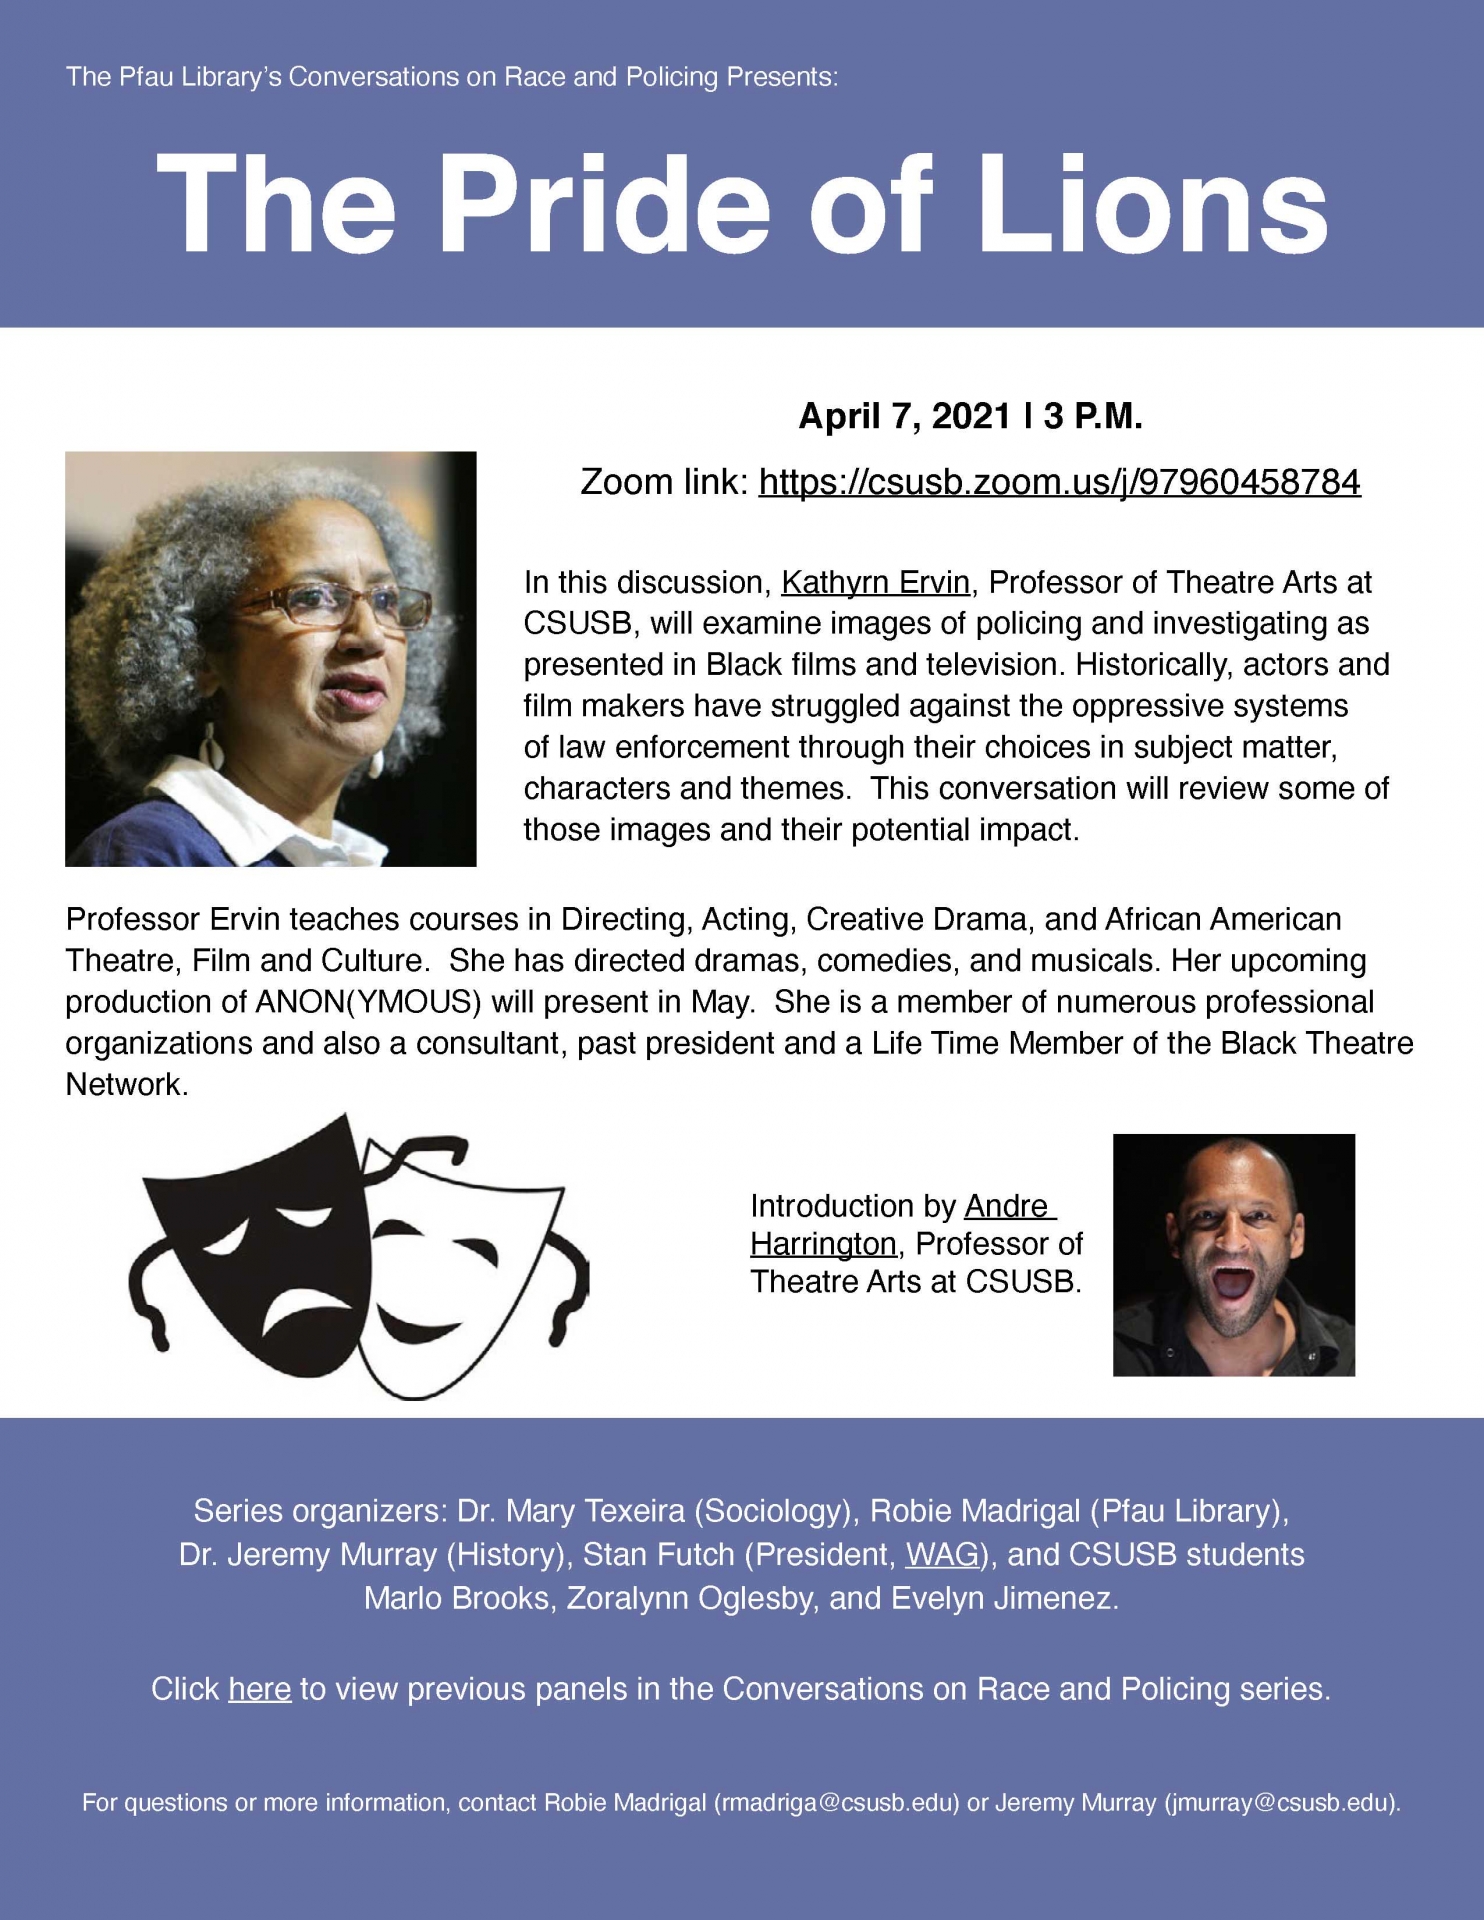 Conversations on Race and Policing April 7 flyer